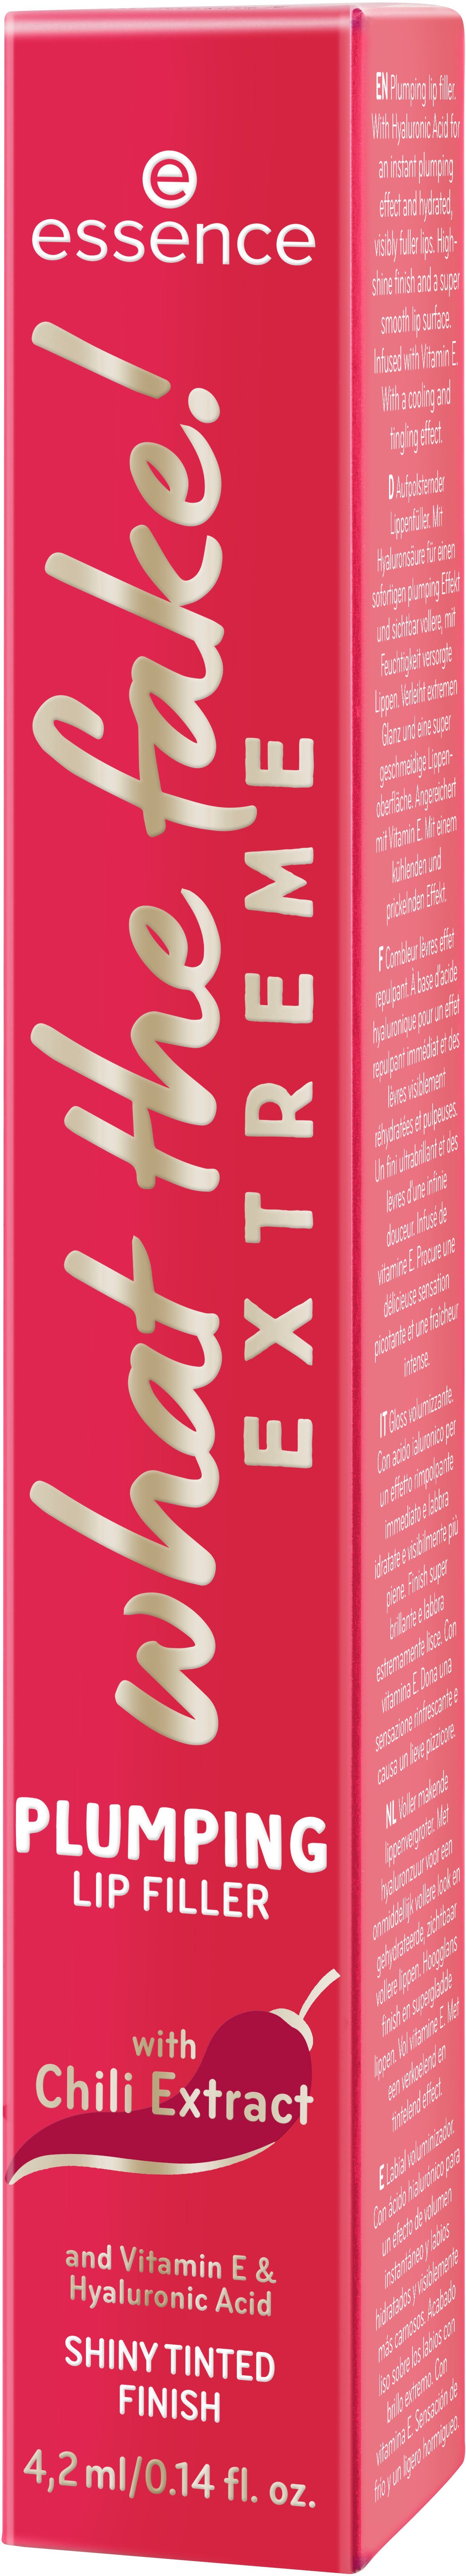 FILLER, PLUMPING fake! what LIP EXTREME the 3-tlg. Essence Lip-Booster